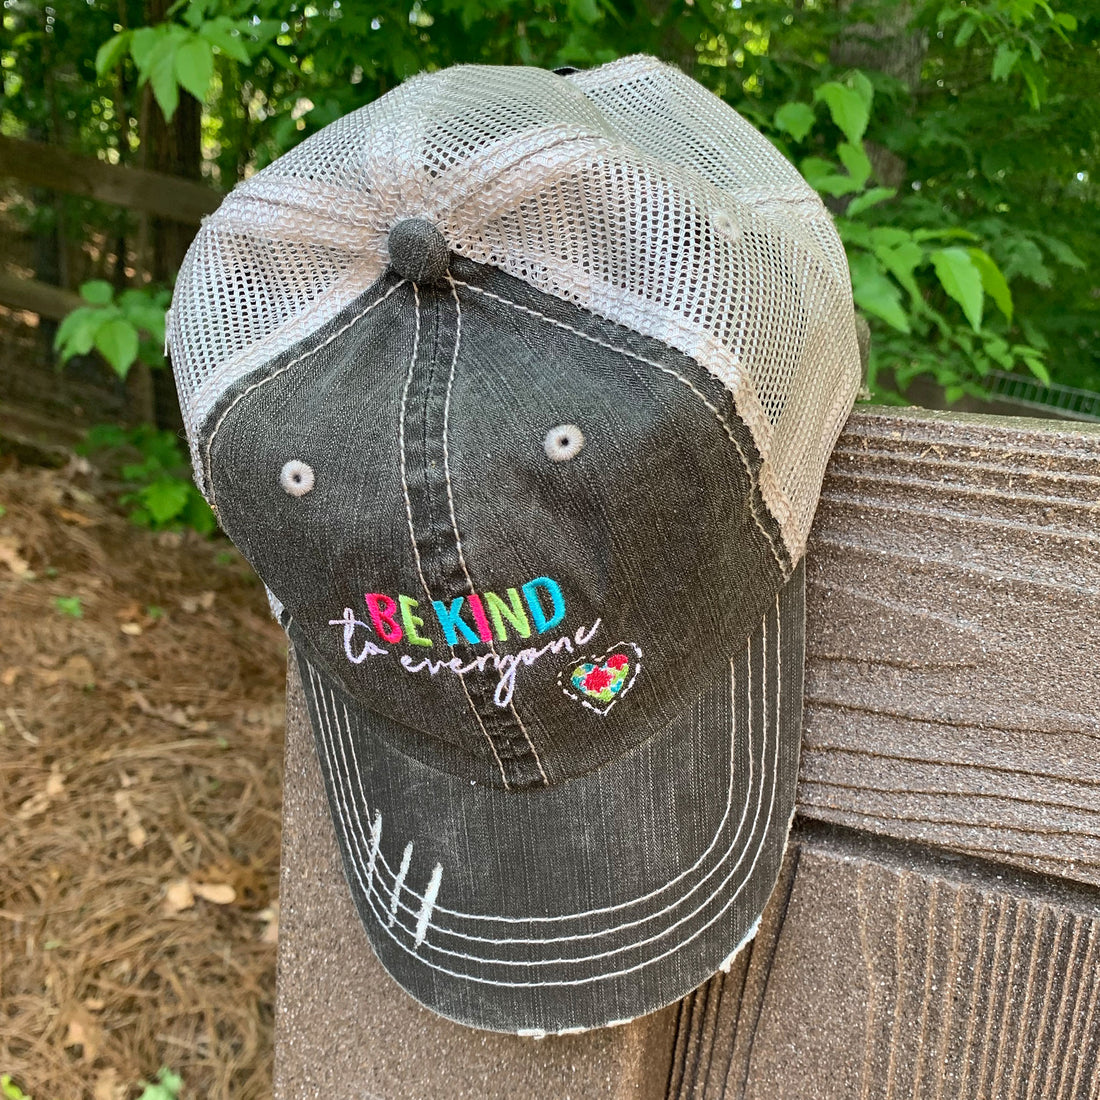 Orignal Jordyn Be Kind to Everyone® Embroidered Hat